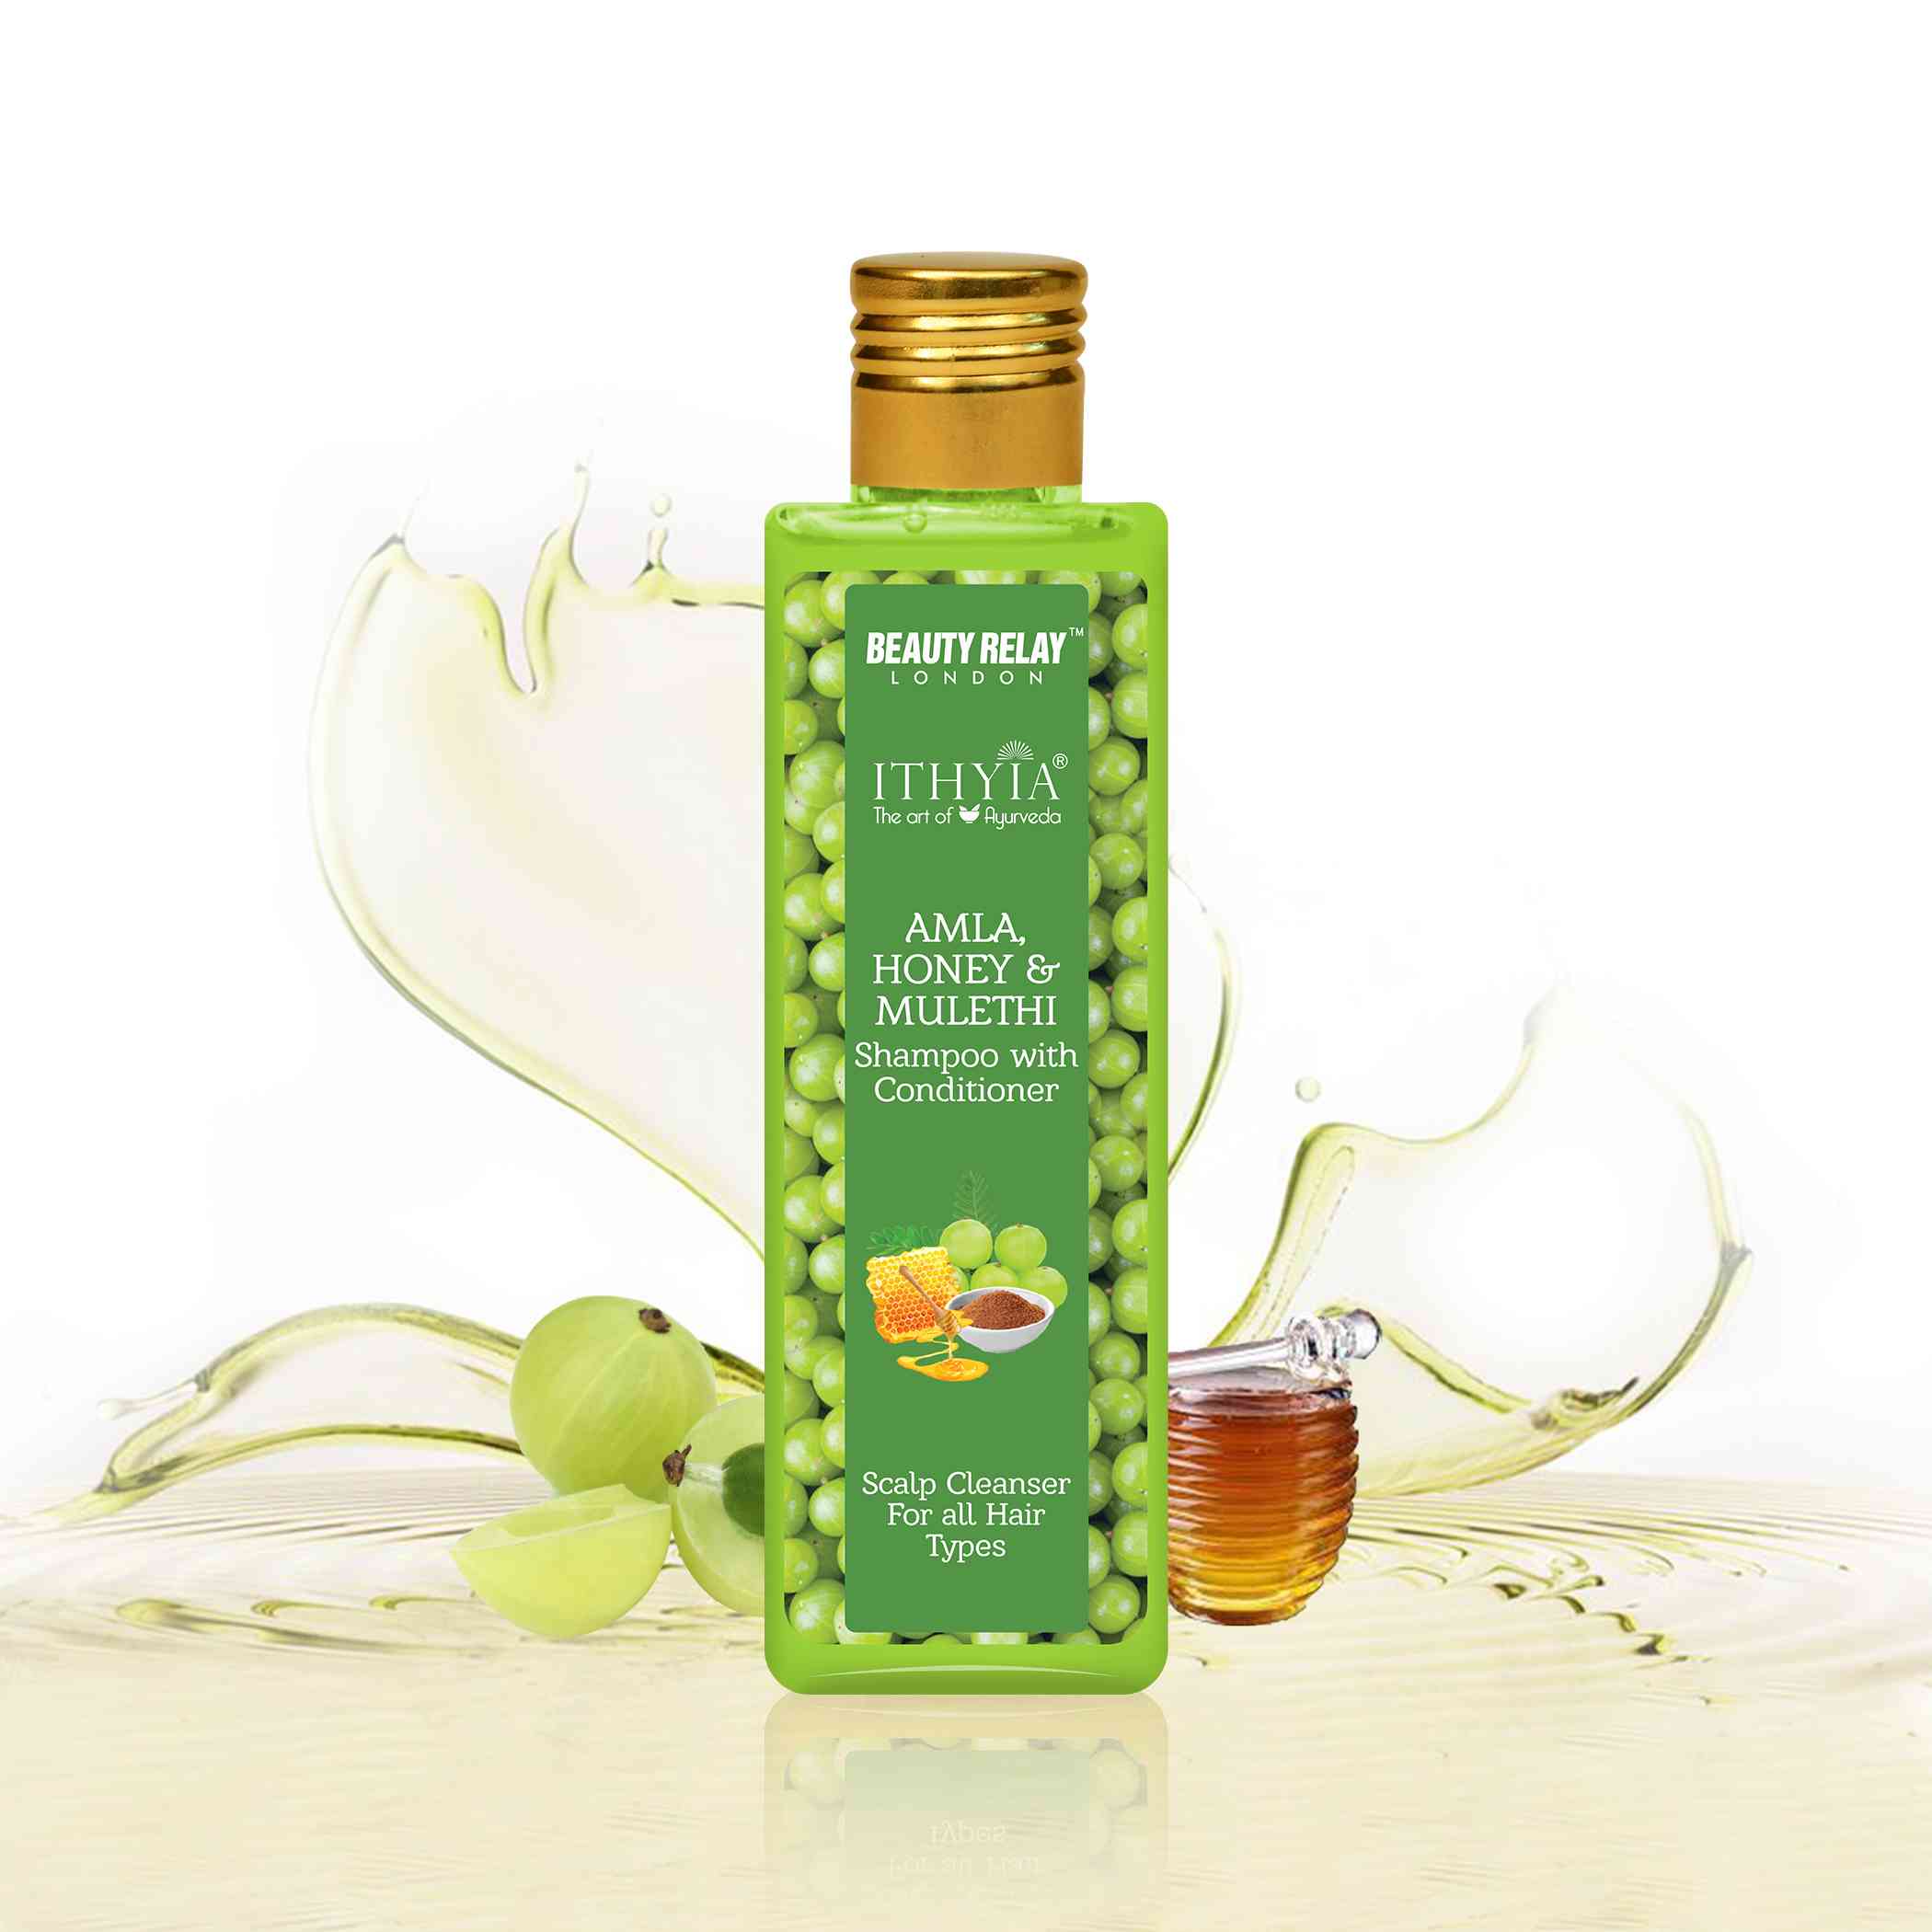 Shampoo And Conditioner with Amla And Mulethi